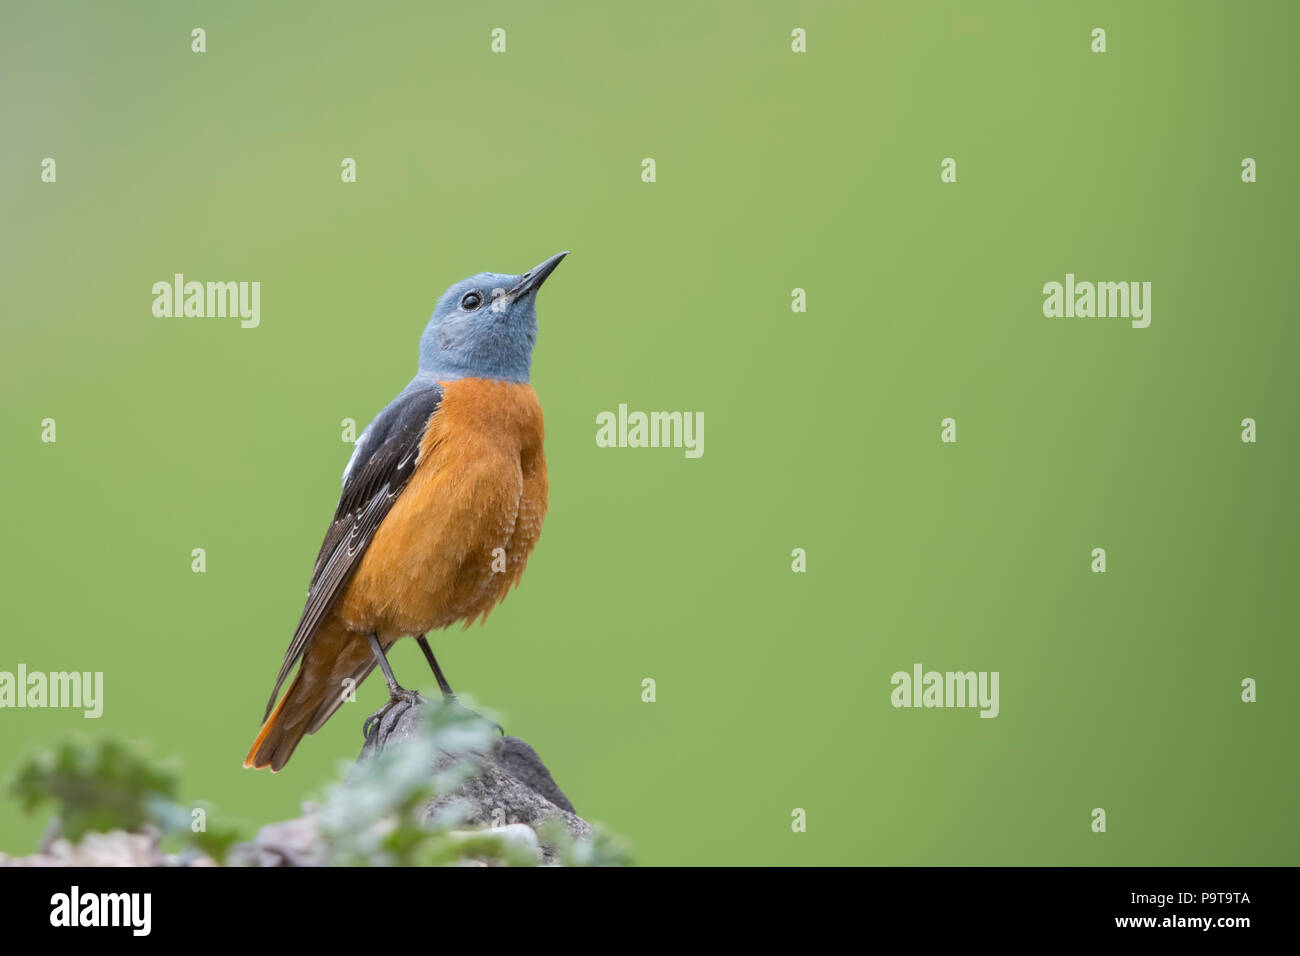 'Deep in thoughts' - Common Rock Thrush rom Xinjiang province of China Stock Photo